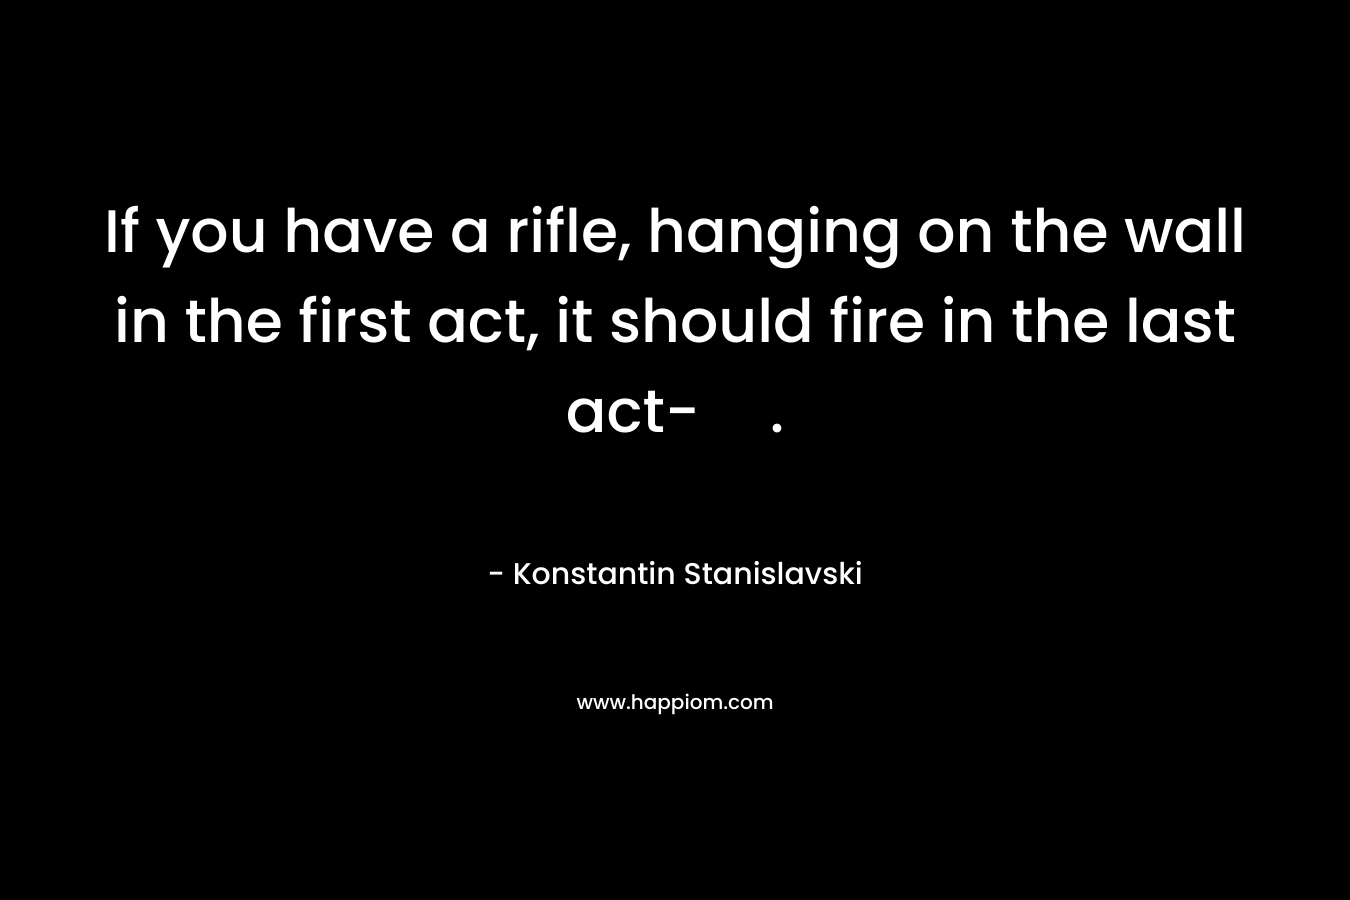 If you have a rifle, hanging on the wall in the first act, it should fire in the last act-.